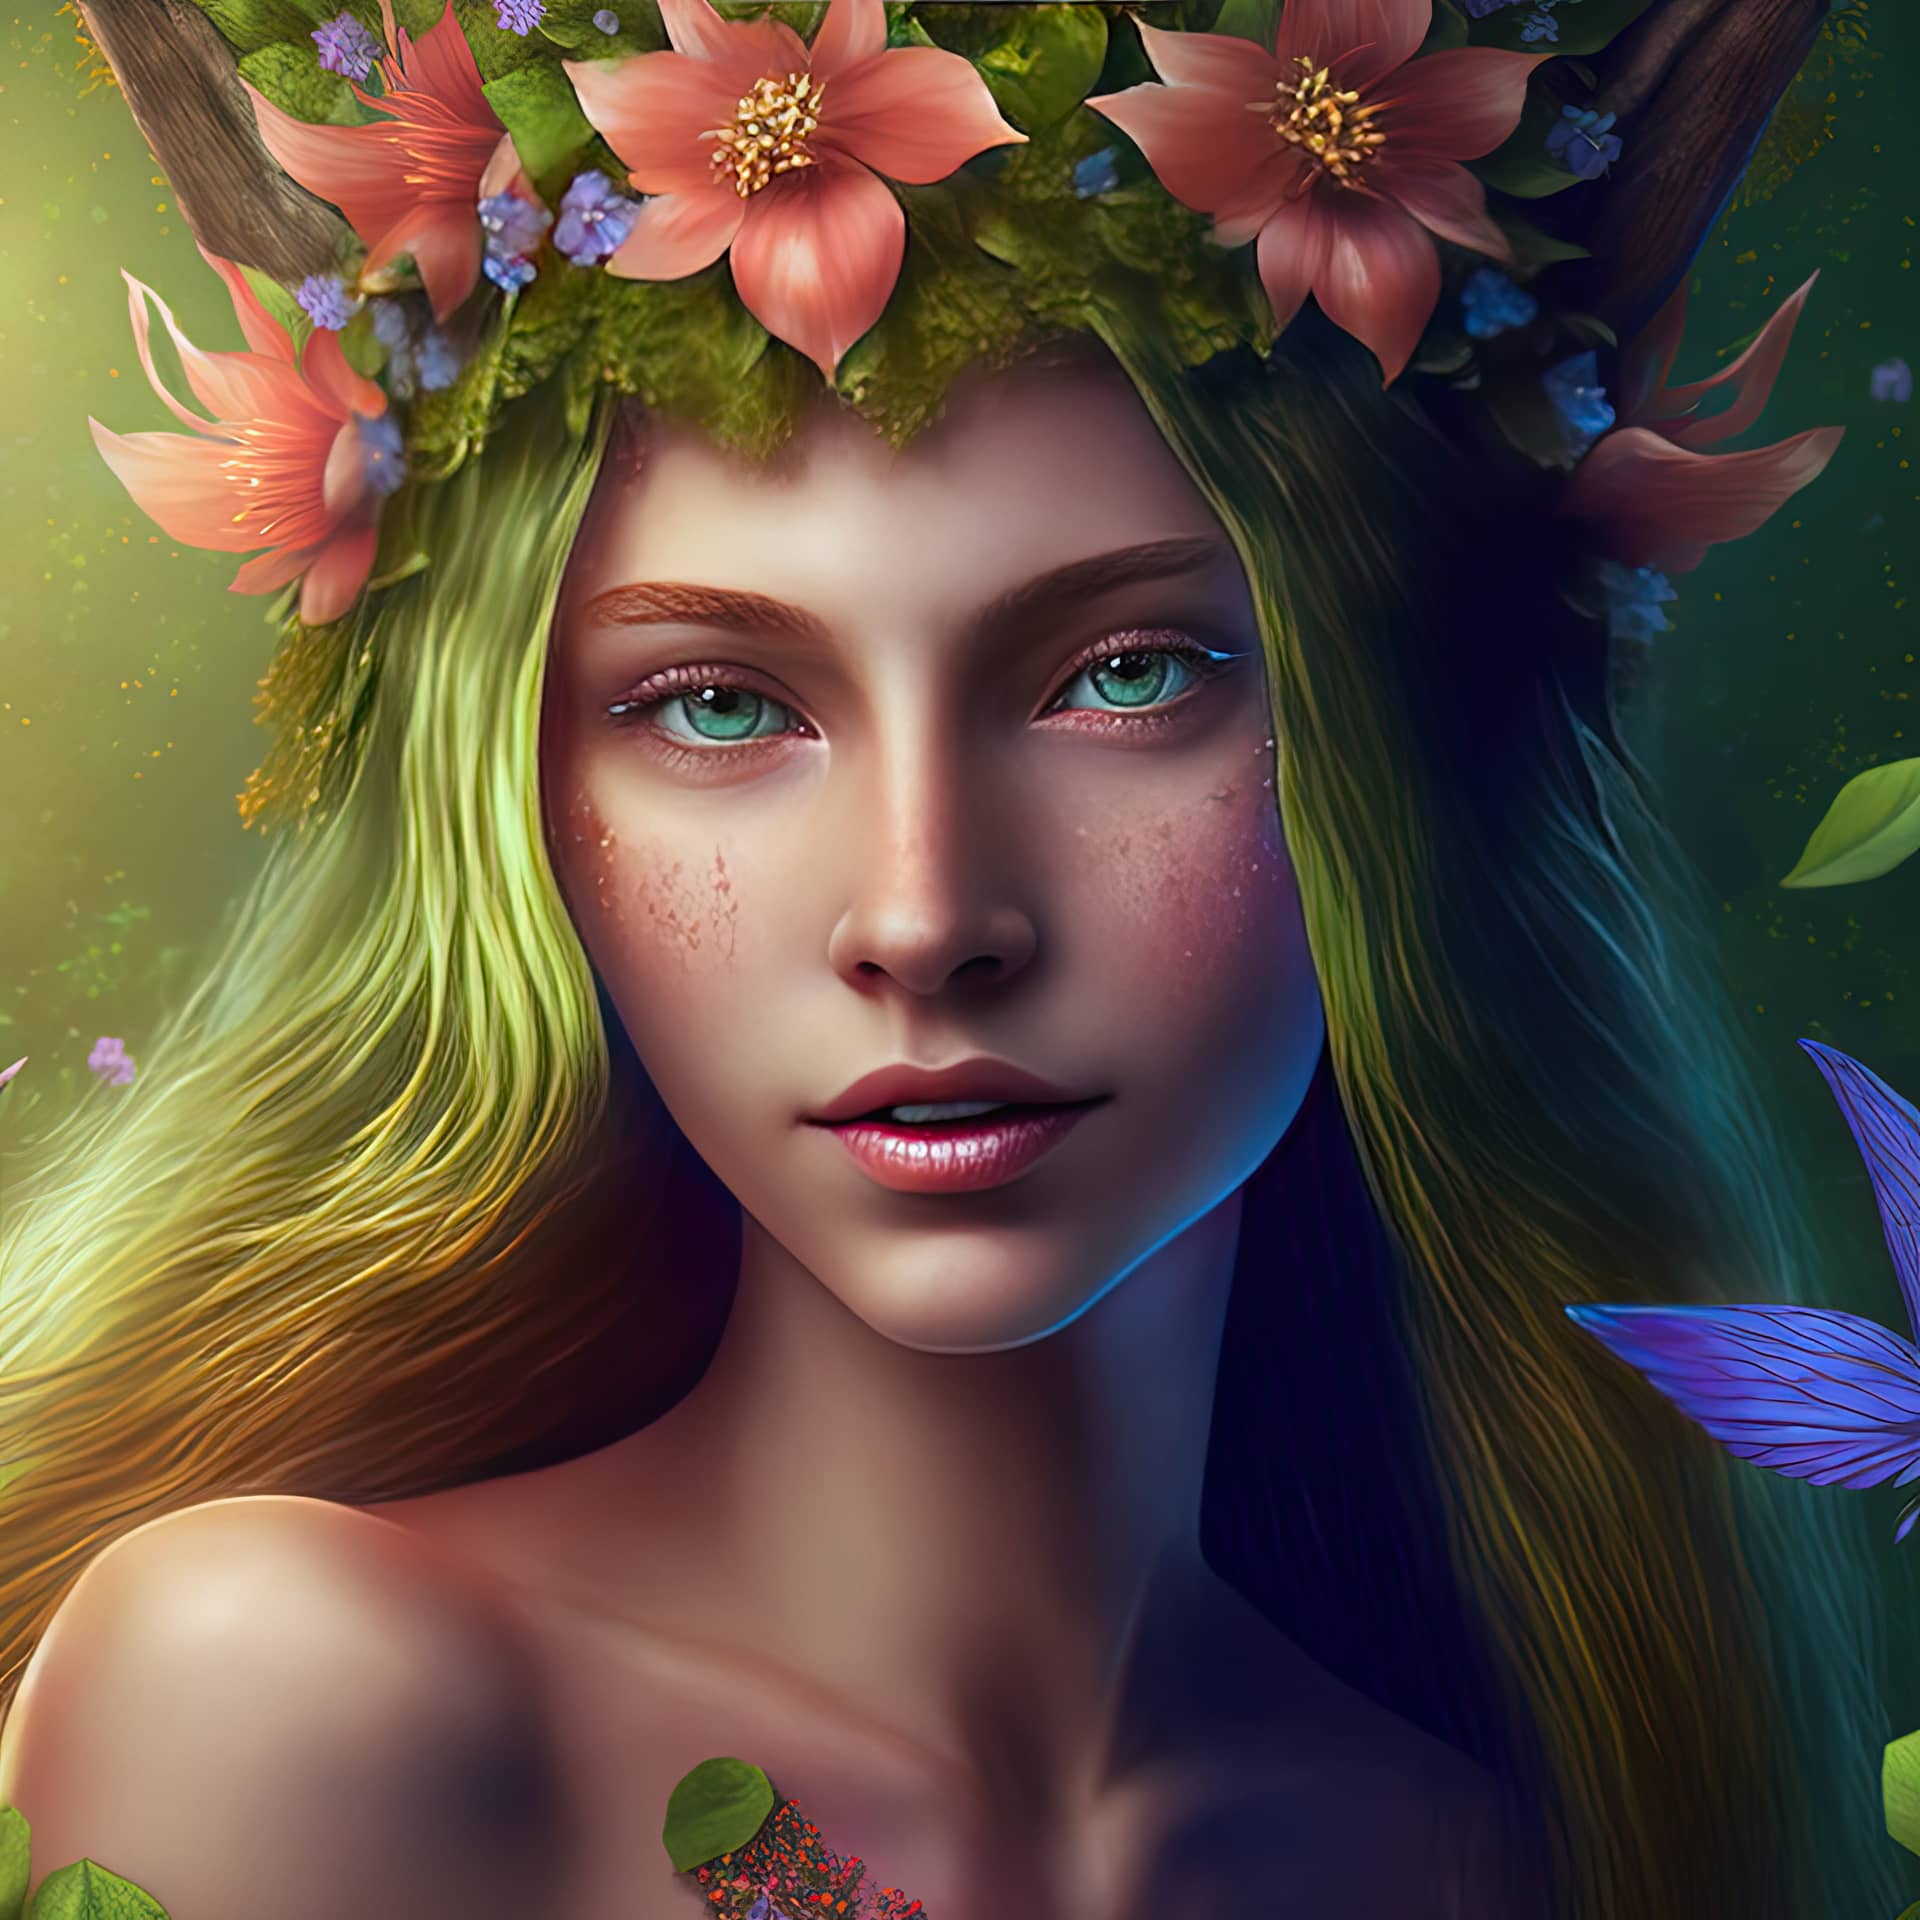 Beautiful young nymph spirit forest with long hair botanical ornaments